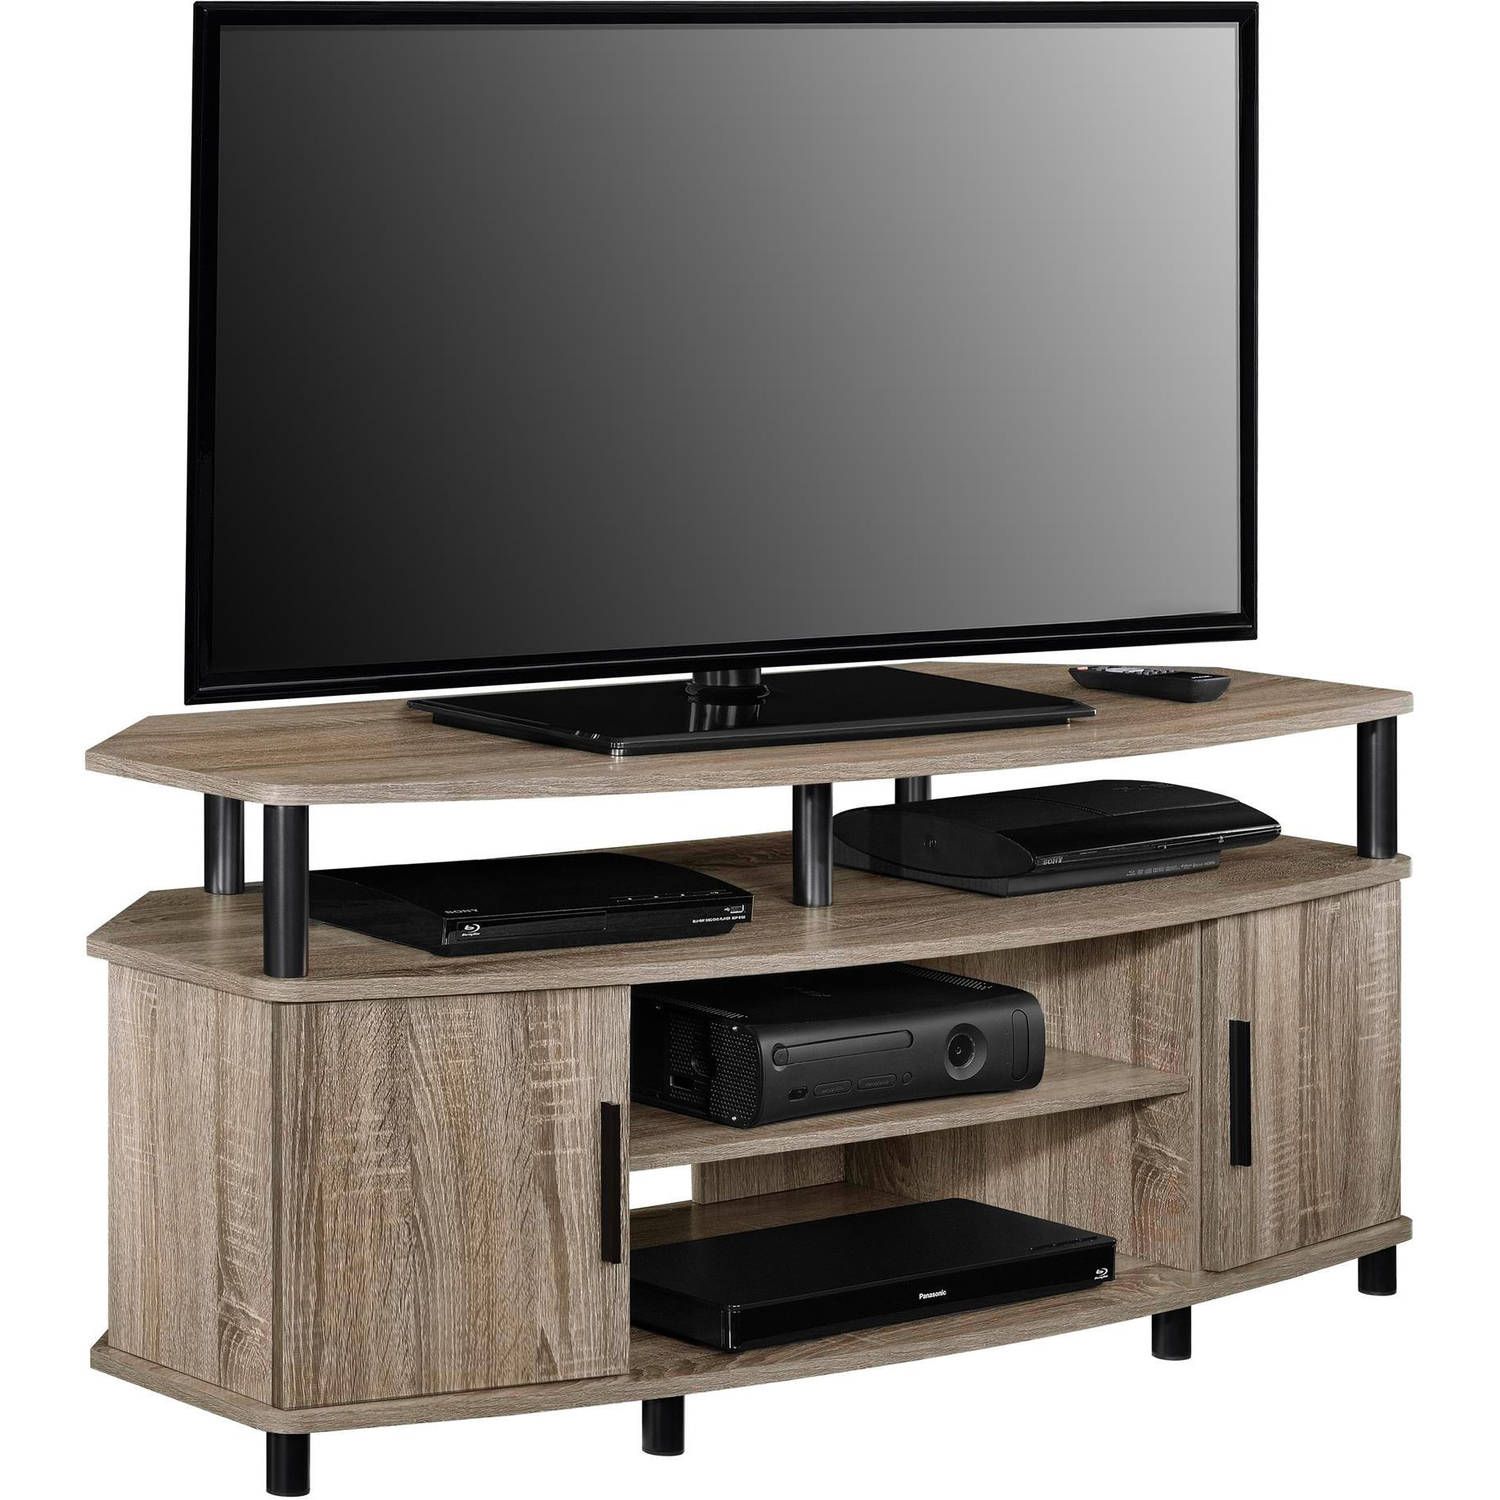 Corner Tv Stand Media Console For Flat Screens Sonoma Oak Regarding Corner Tv Stands For Flat Screen (View 10 of 15)